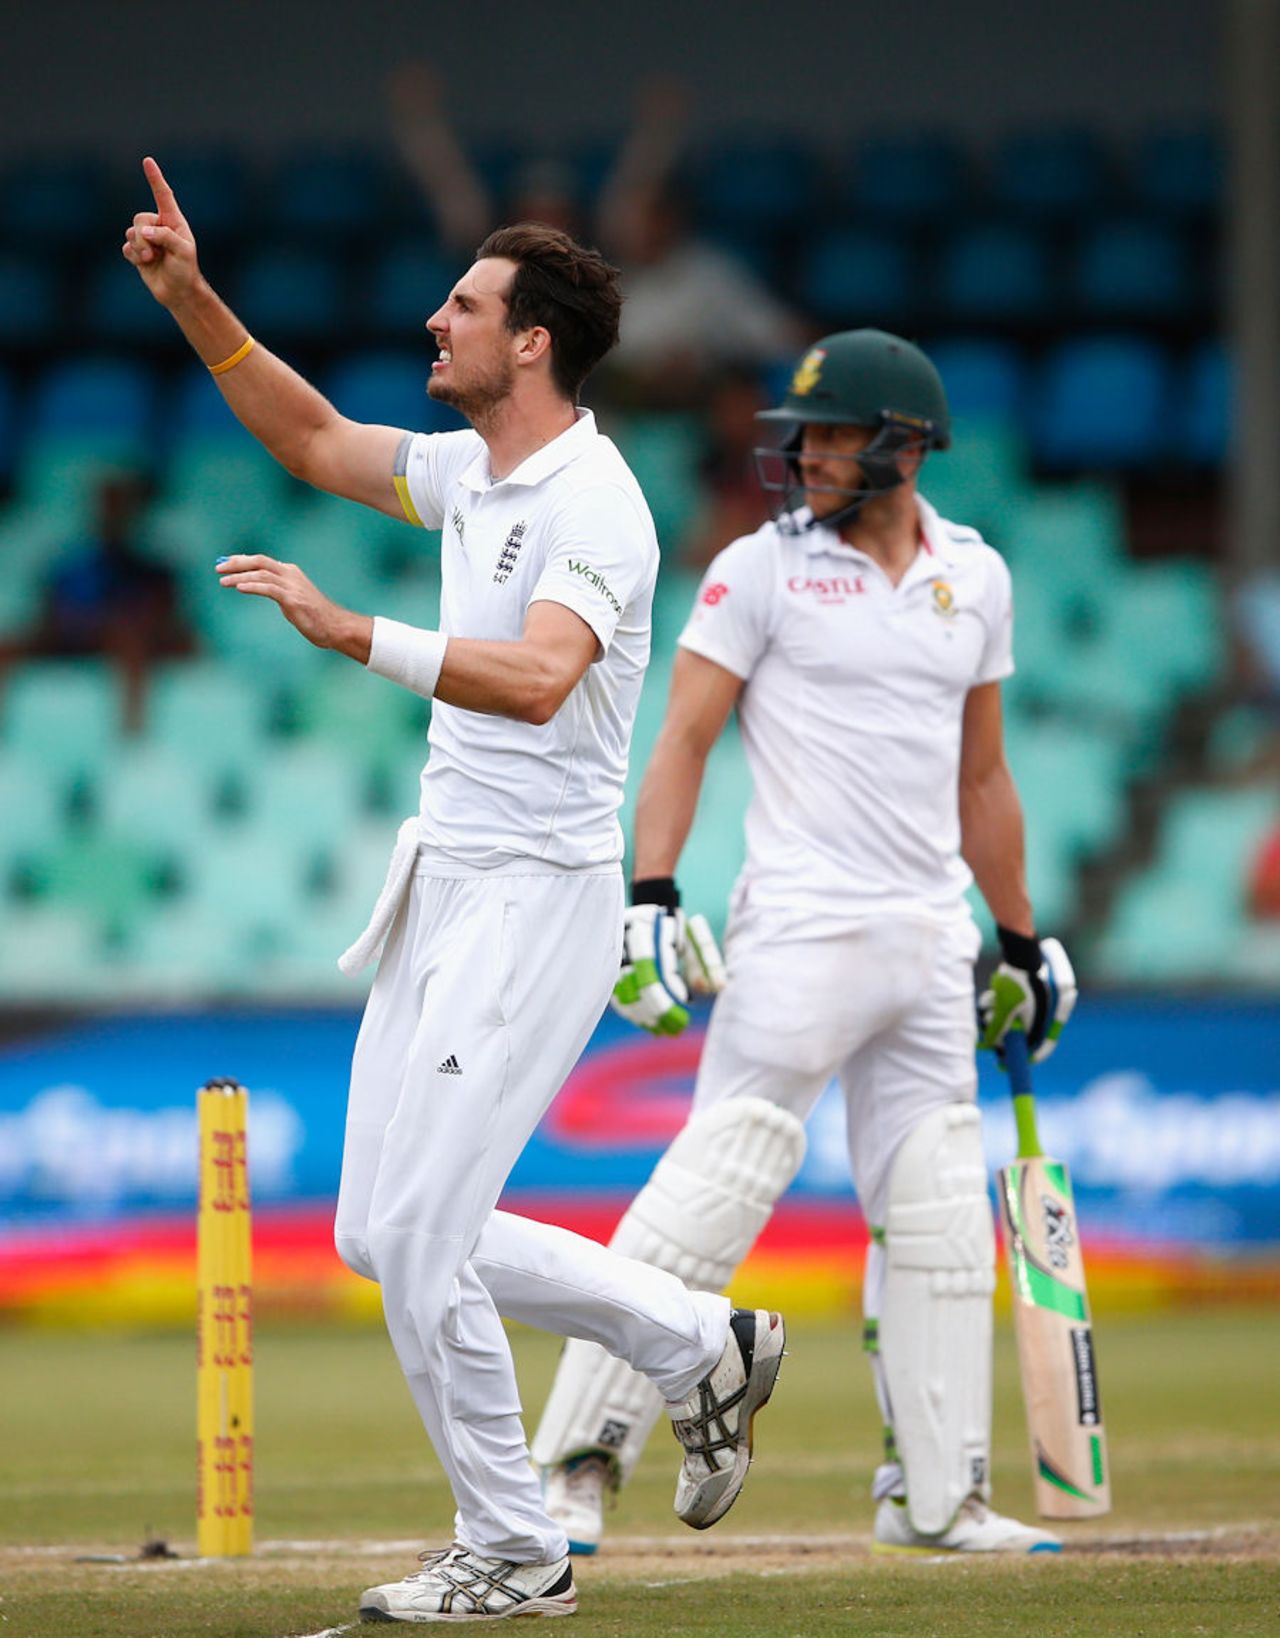 Steve Finn led England's victory push with three wickets, South Africa v England, 1st Test, Durban, 4th day, December 29, 2015